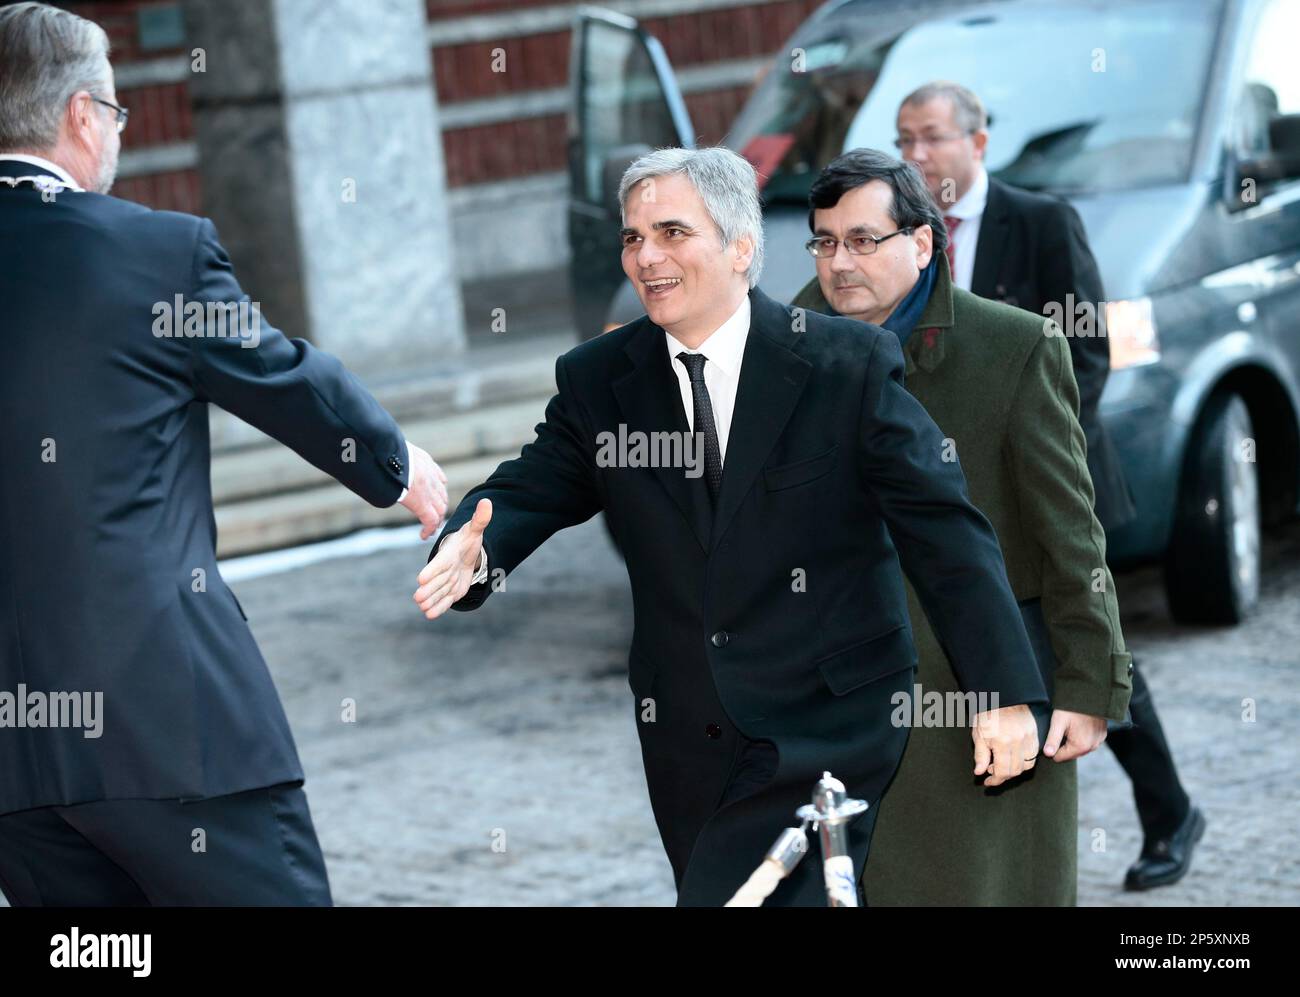 Austrian Prime Minister Werner Faymann is greeted by Oslo mayor Fabian Stang, left, outside the City Hall prior to the Nobel Peace Prize presentation ceremony Monday Dec. 10, 2012. (AP Photo / Stian Lysberg Solum, NTB scanpix) NORWAY OUT Stock Photo